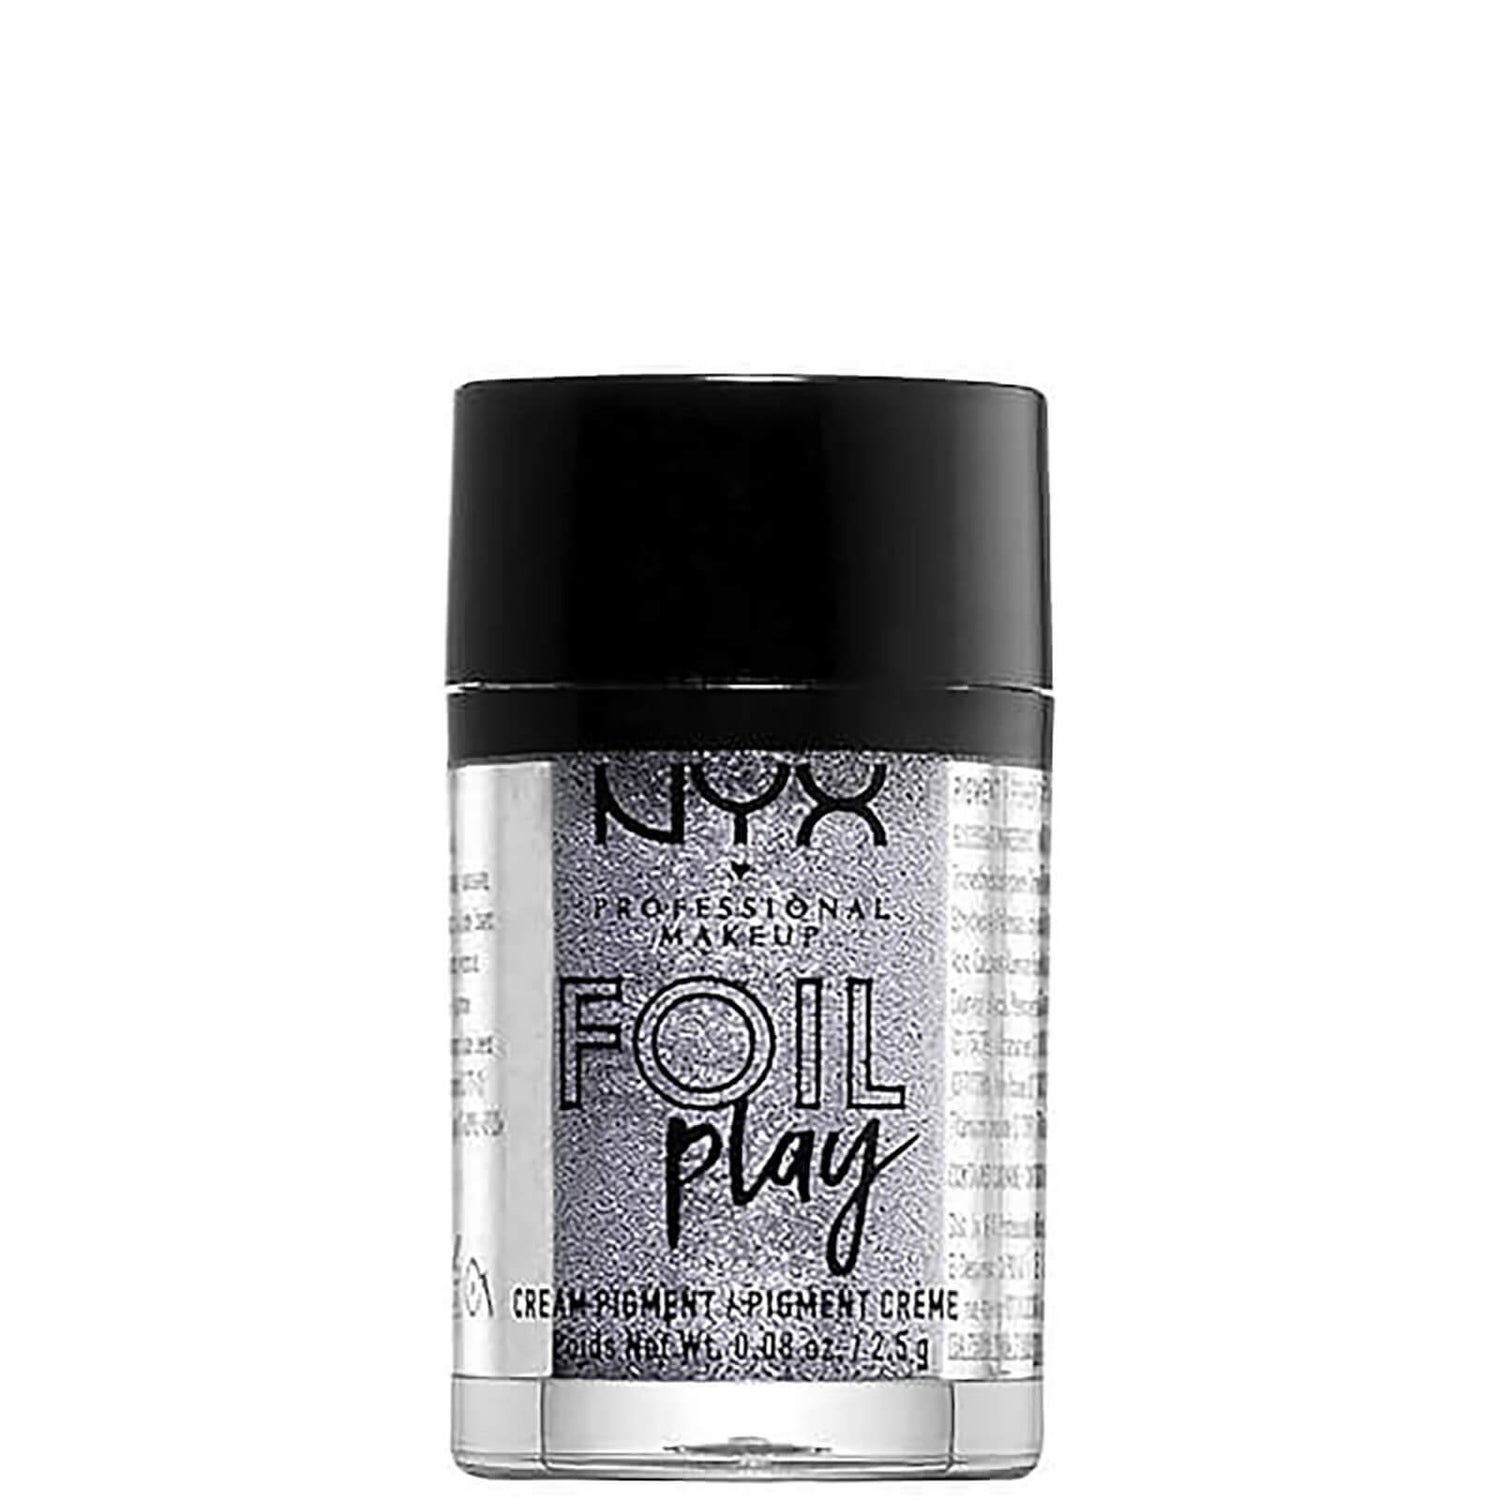 NYX Professional Makeup Foil Play Cream Pigment Eyeshadow (Various Shades)